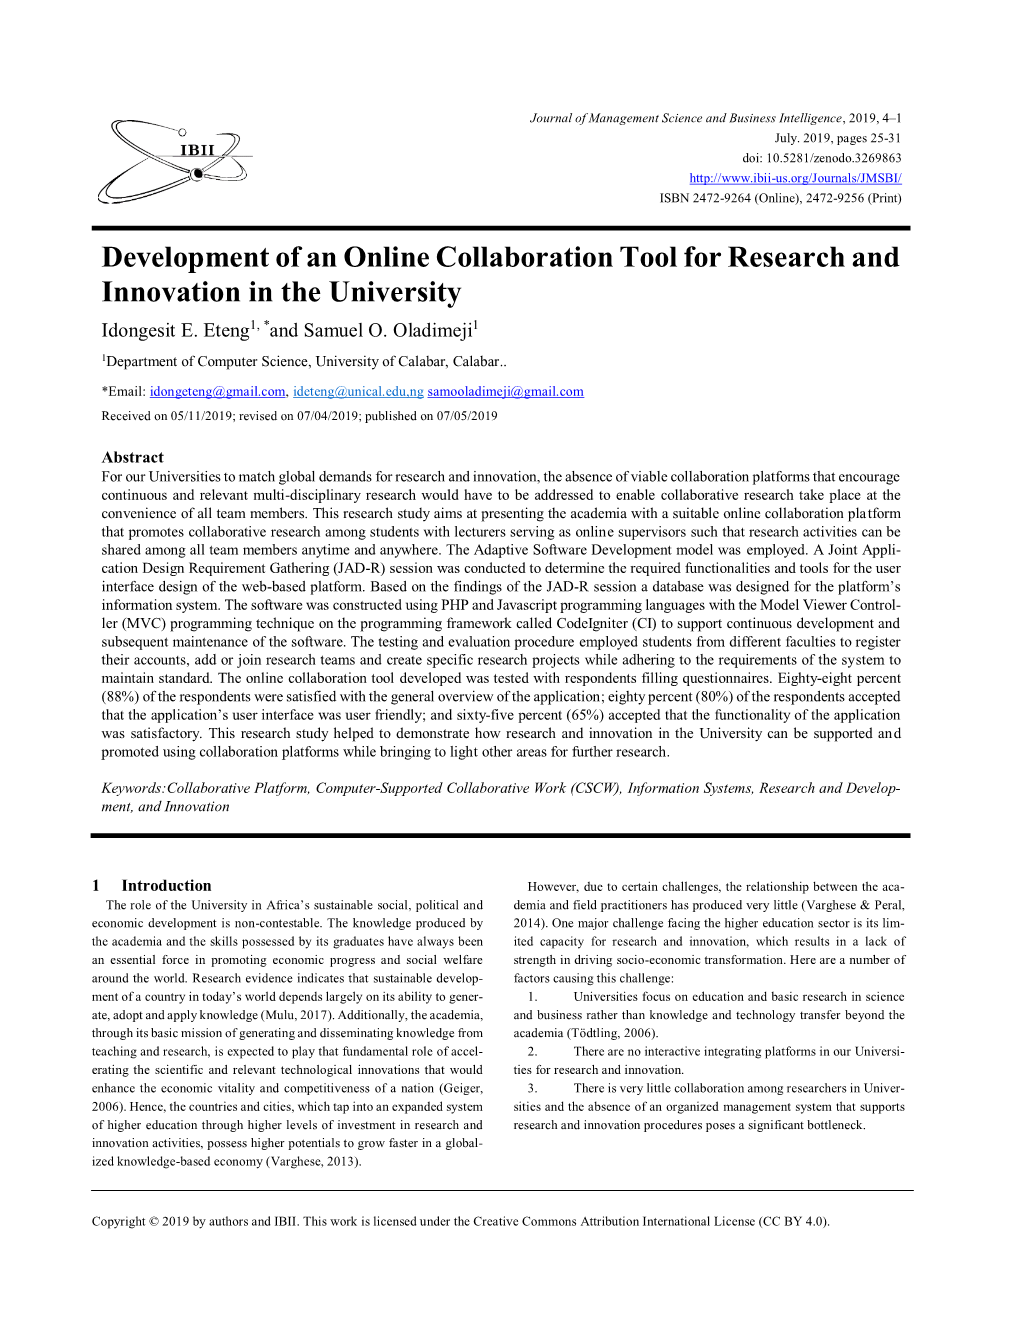 Development of an Online Collaboration Tool for Research and Innovation in the University Idongesit E